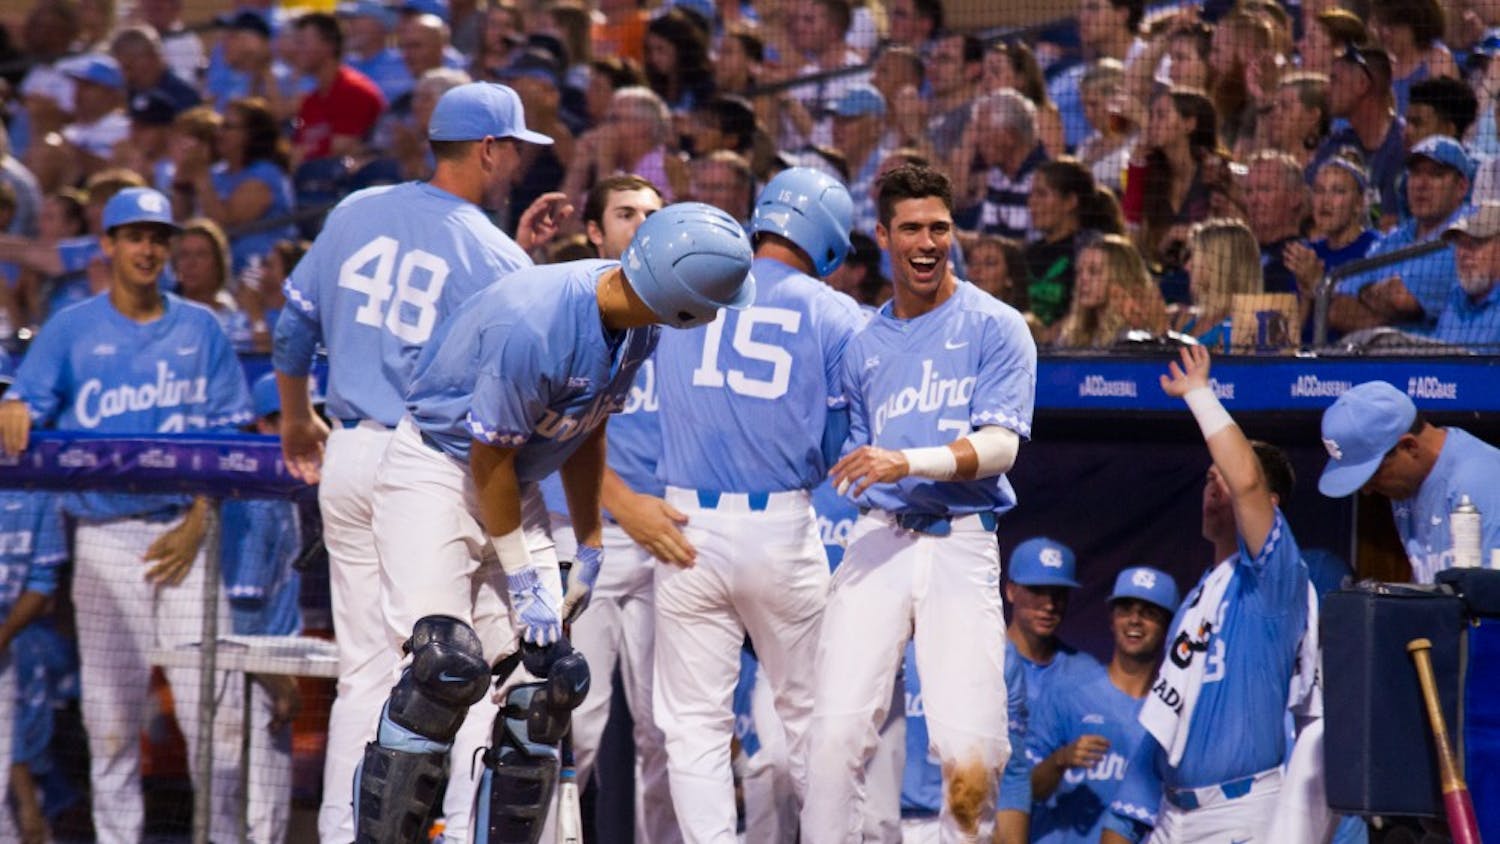 Carolina baseball players congratulate one another during the game on May 23. 